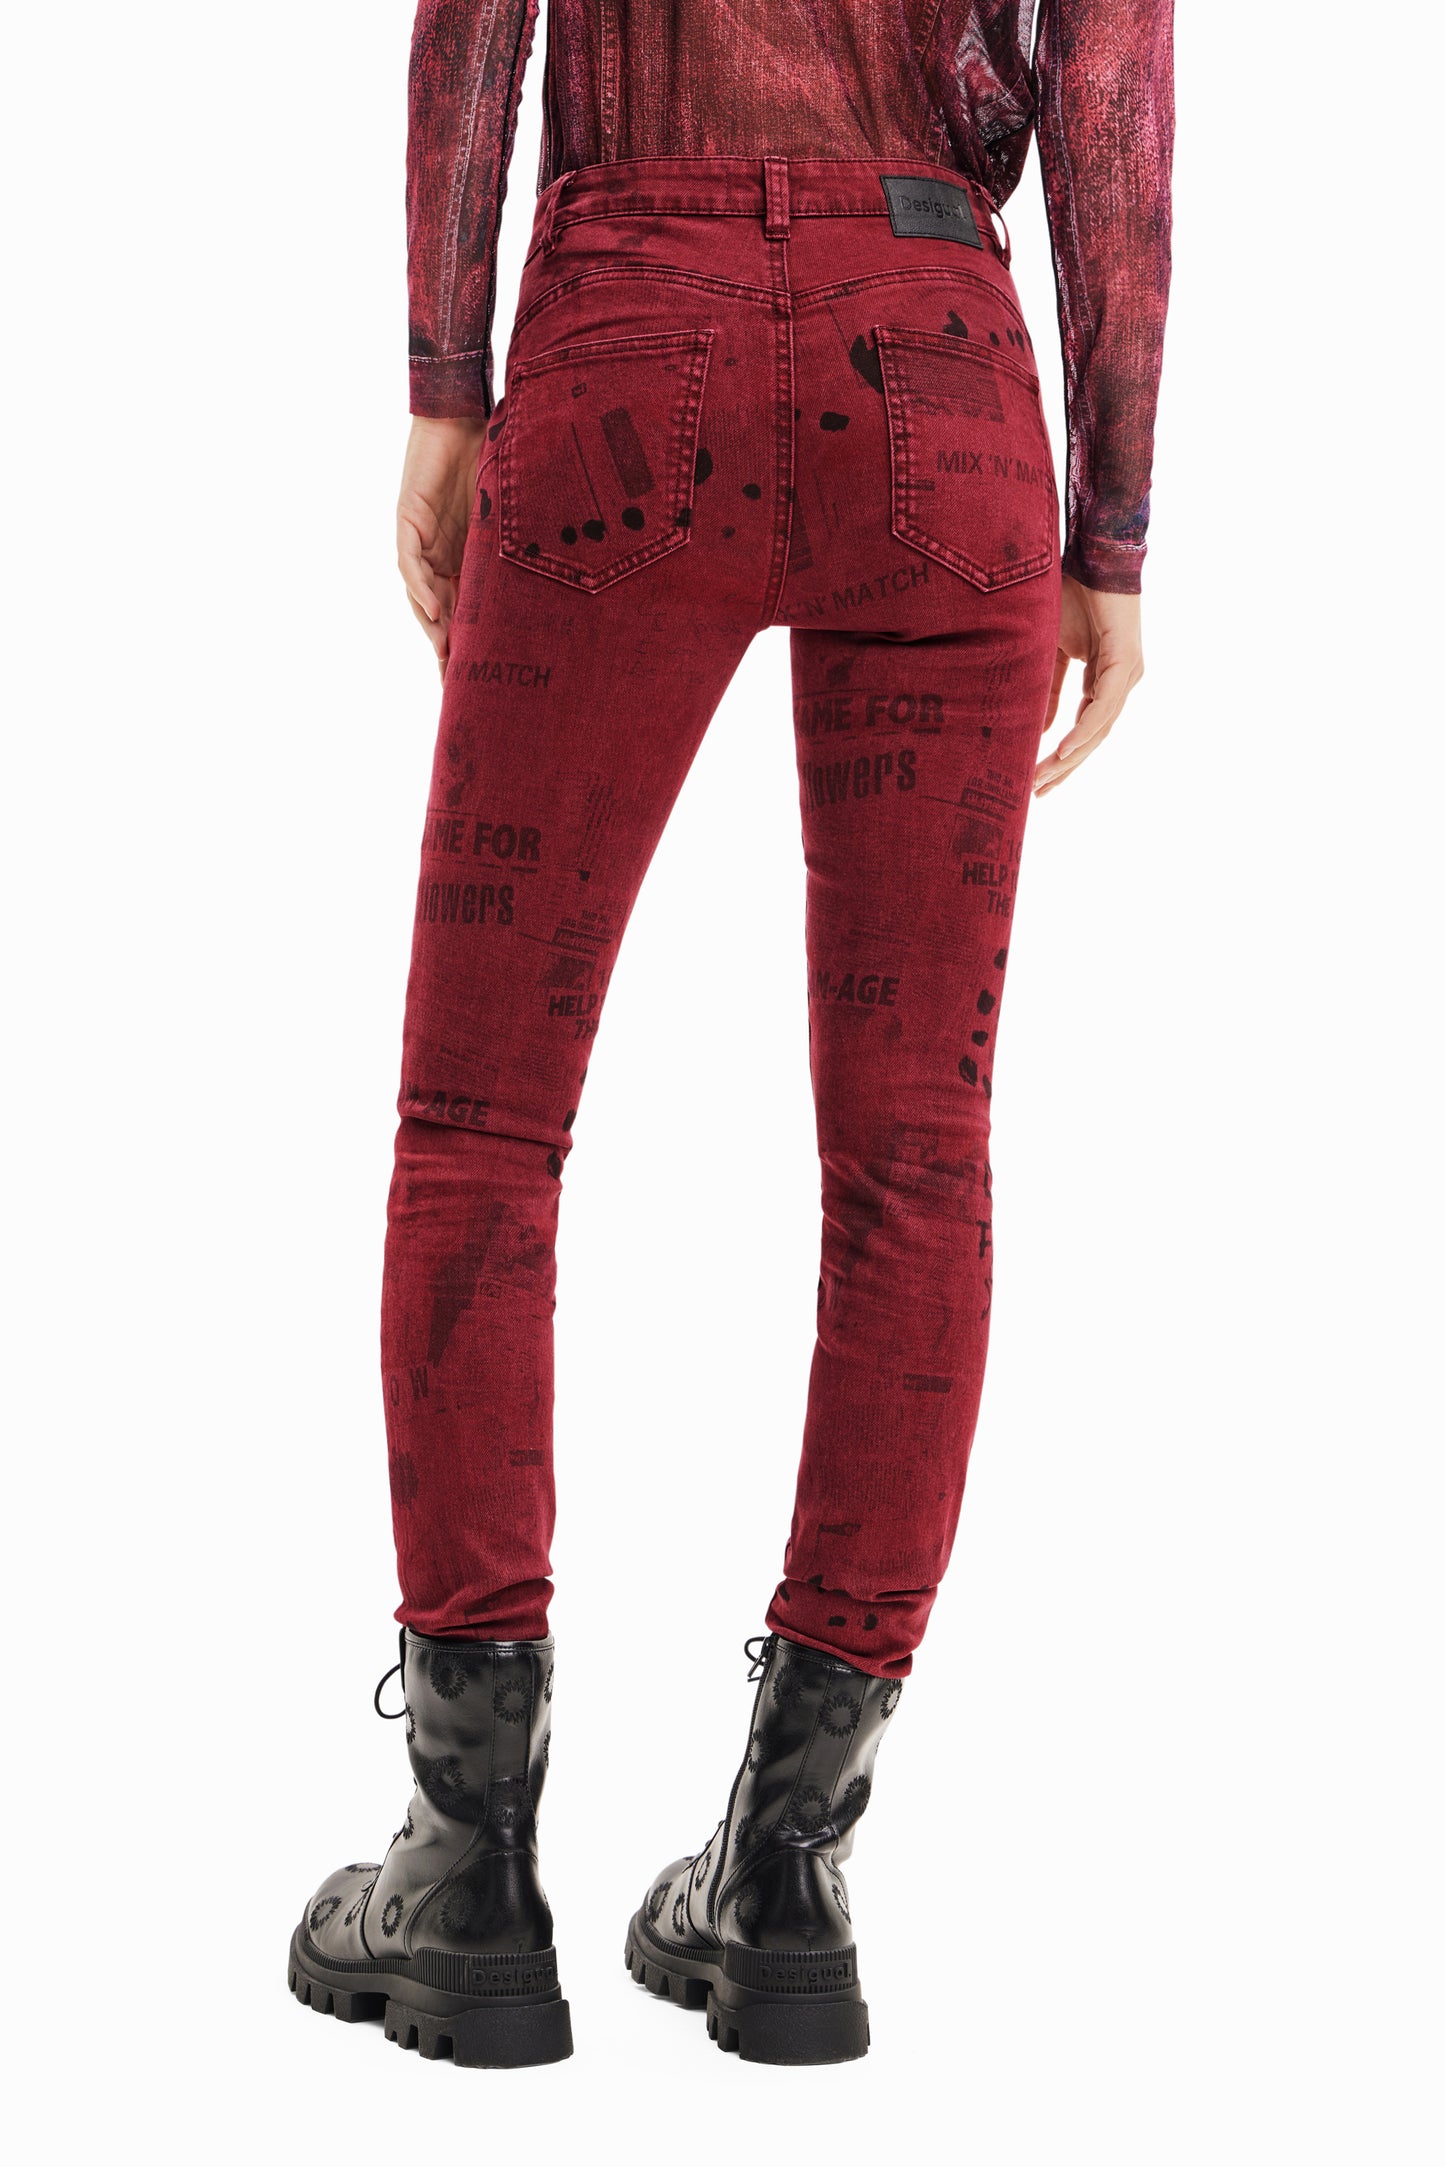 Desigual 23WWDD78 Newspaper Print Jeans - Above The Crowd Boutique